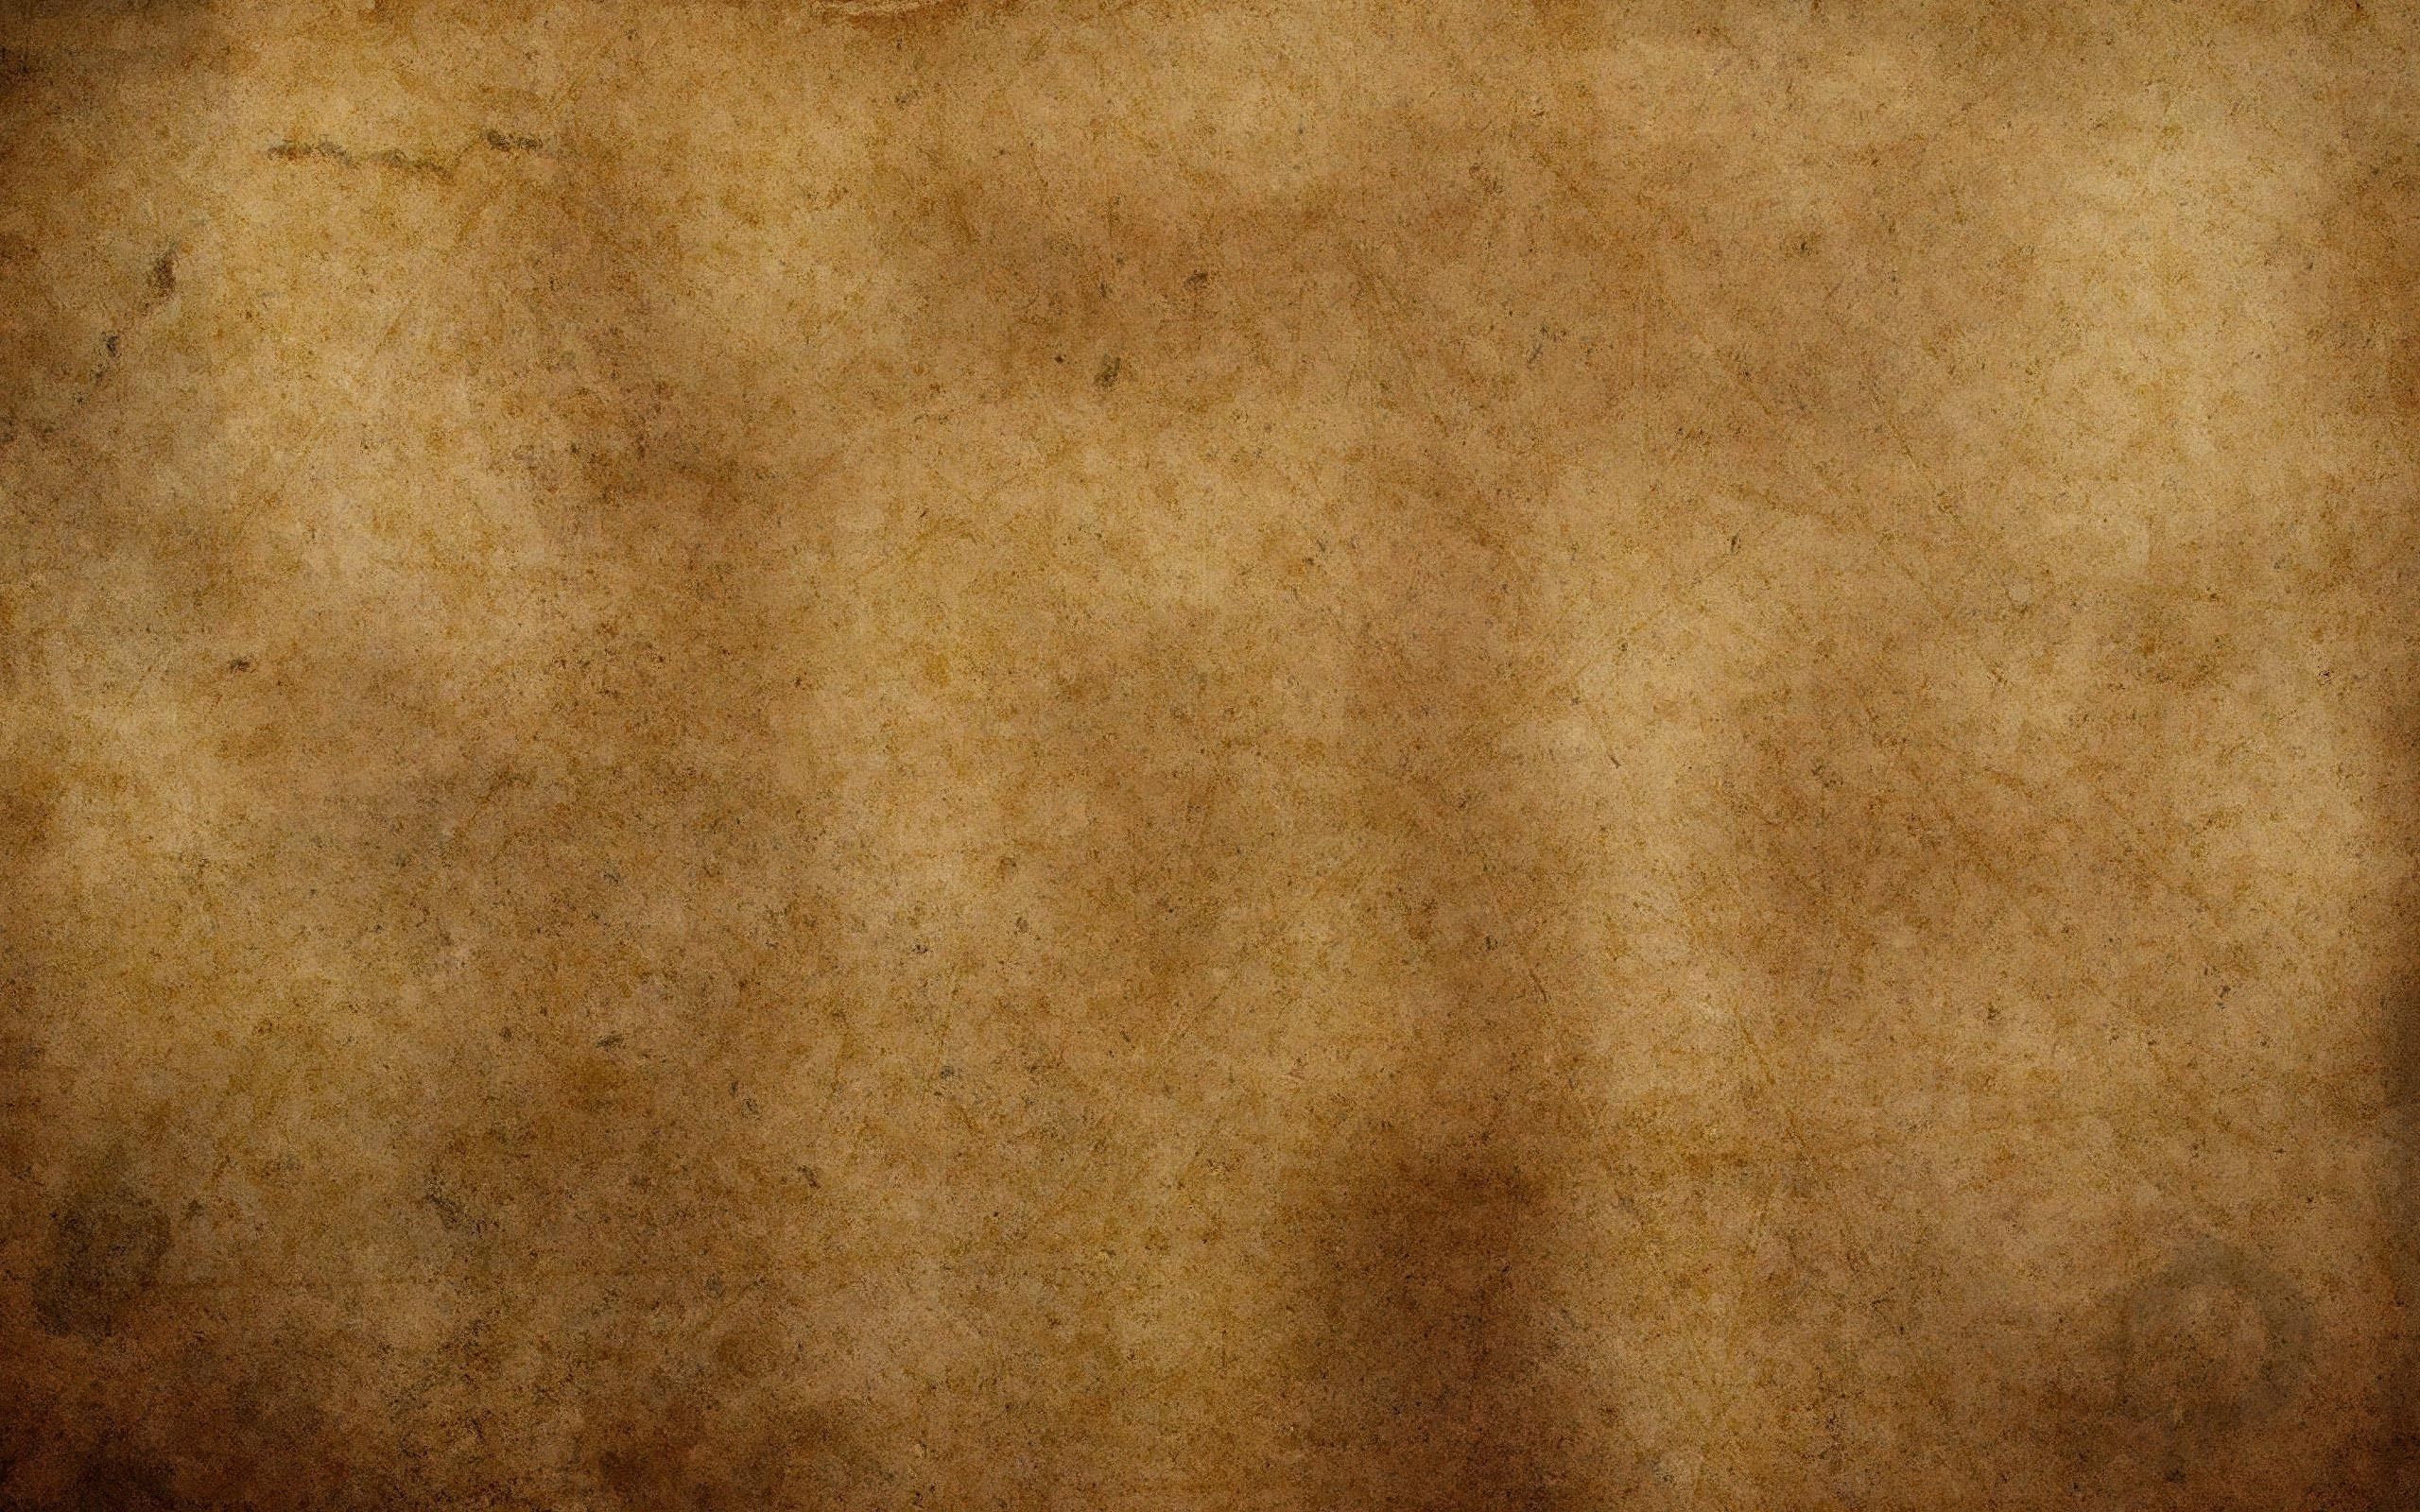 HD wallpaper old, paper, spots, surface, textures, texture, background, stains